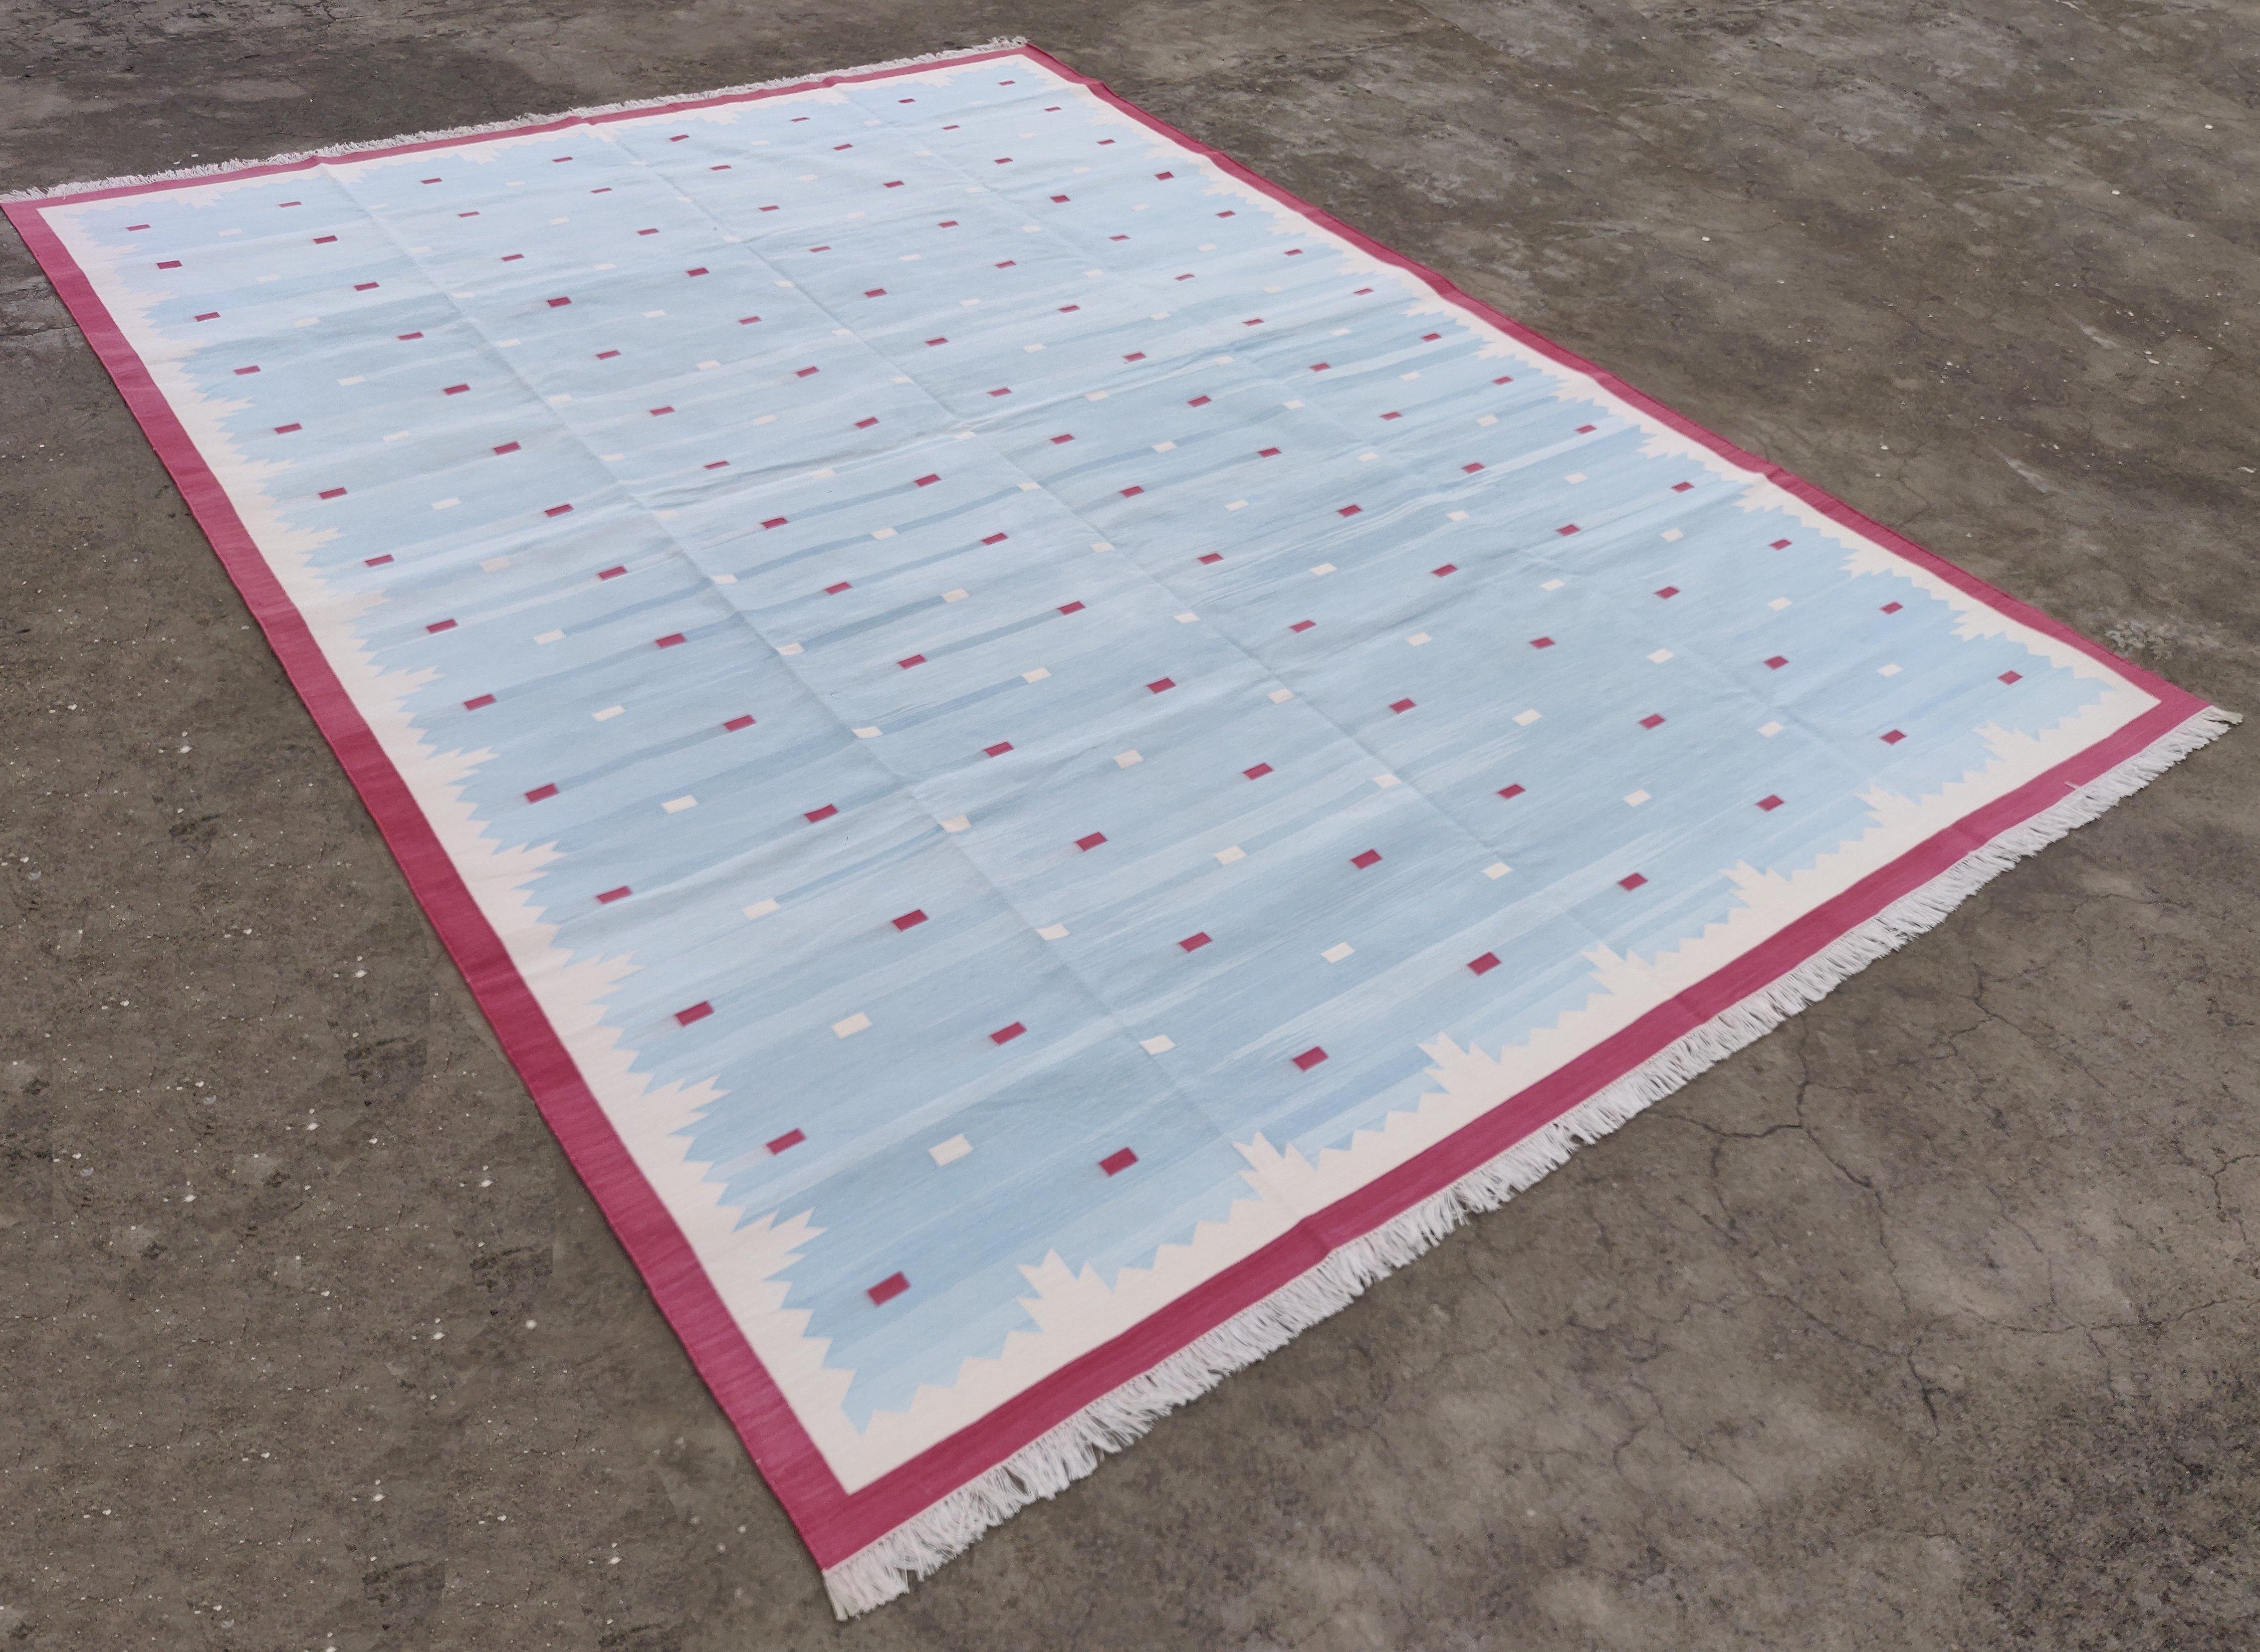 Cotton Vegetable Dyed Sky Blue, Cream & Raspberry Pink Geometric Rug-10'x14' 
These special flat-weave dhurries are hand-woven with 15 ply 100% cotton yarn. Due to the special manufacturing techniques used to create our rugs, the size and color of